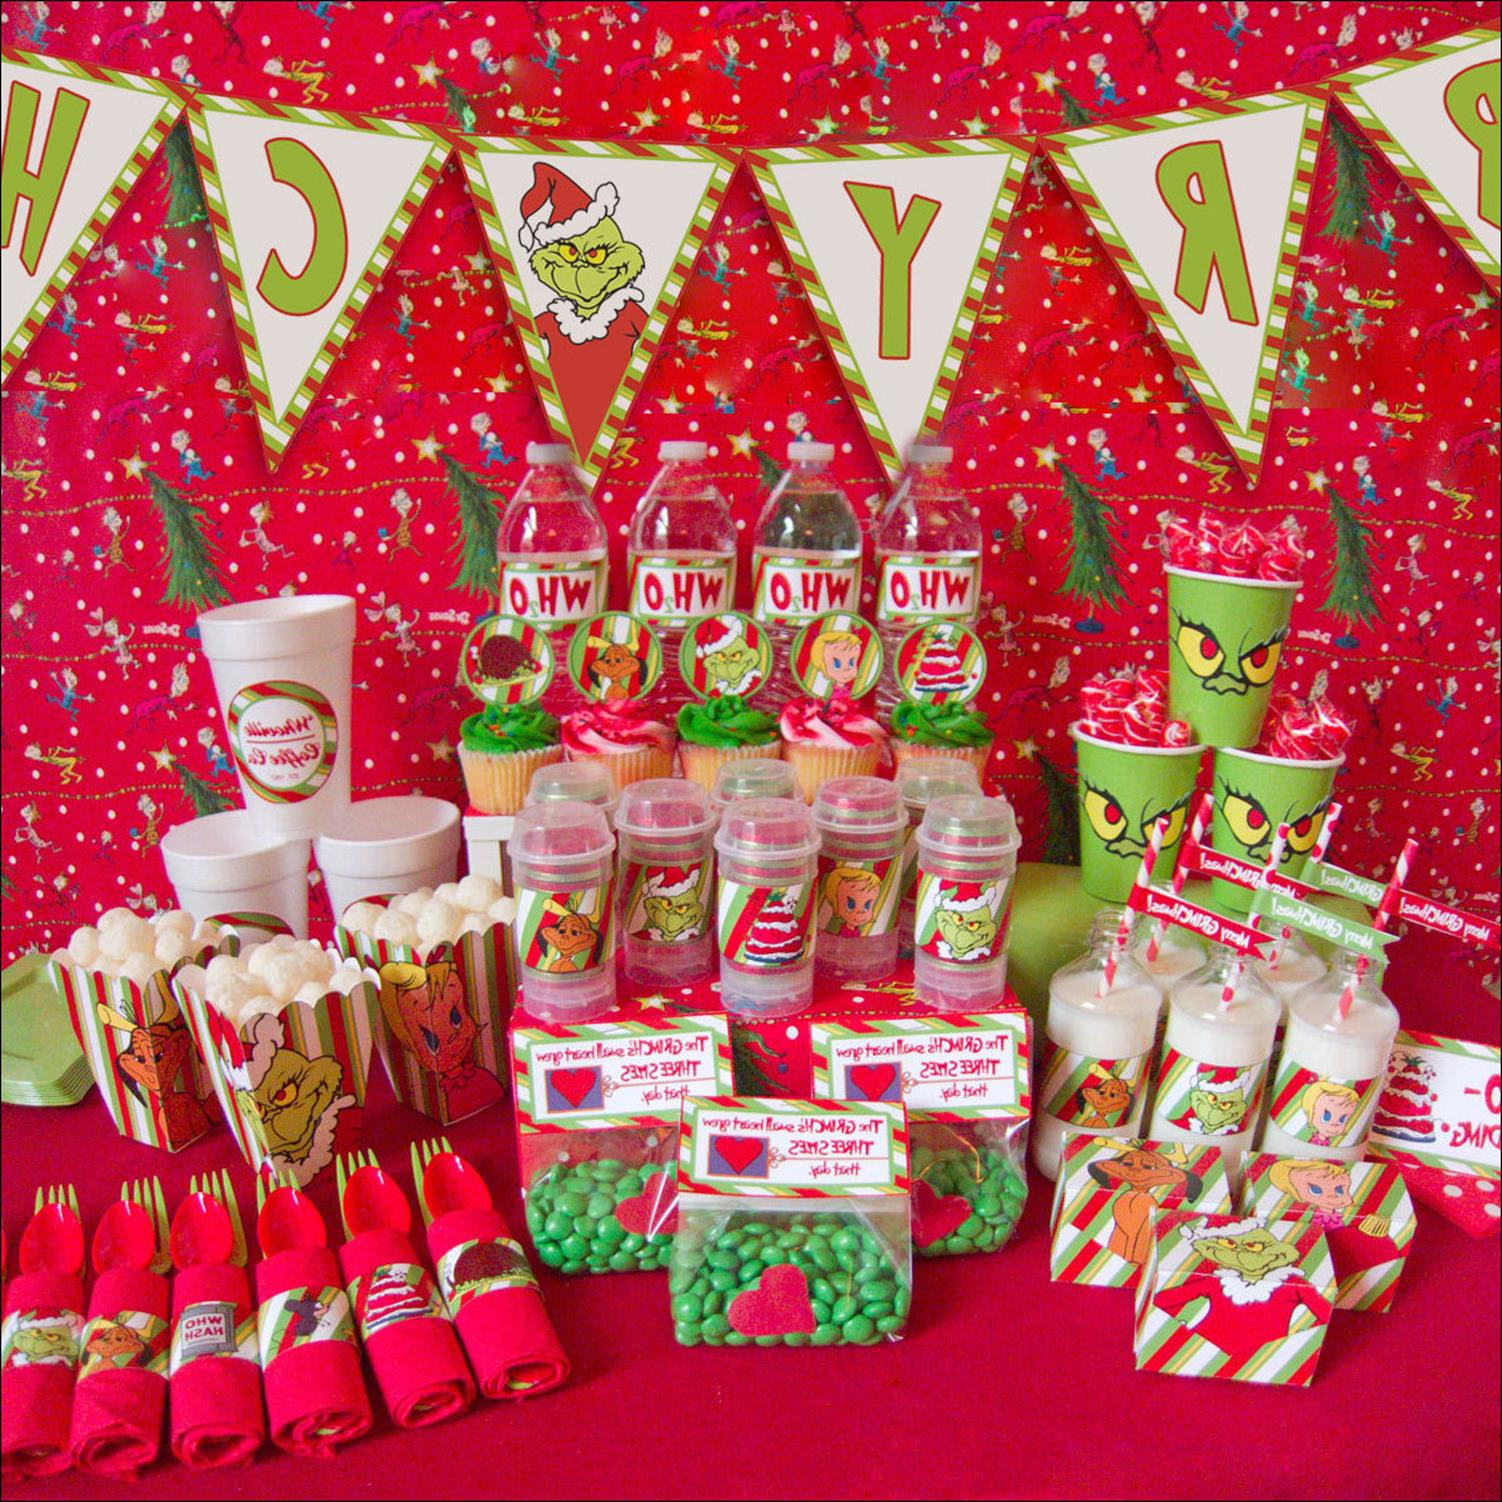 How The Grinch Stole Christmas Party Ideas
 Best How The Grinch Stole Christmas Party Decorations